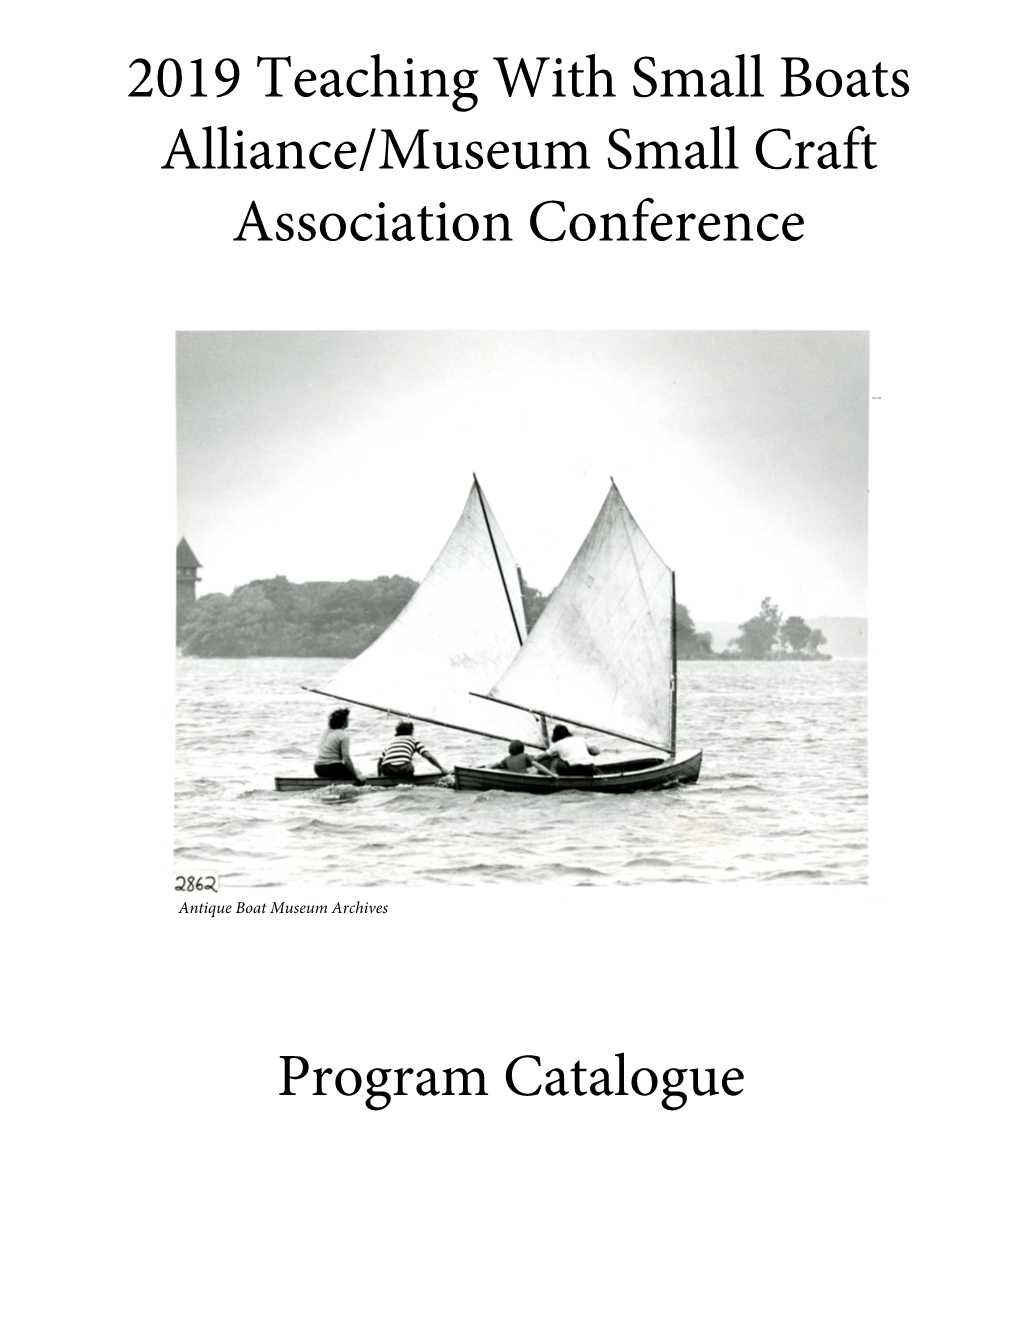 2019 Teaching with Small Boats Alliance/Museum Small Craft Association Conference